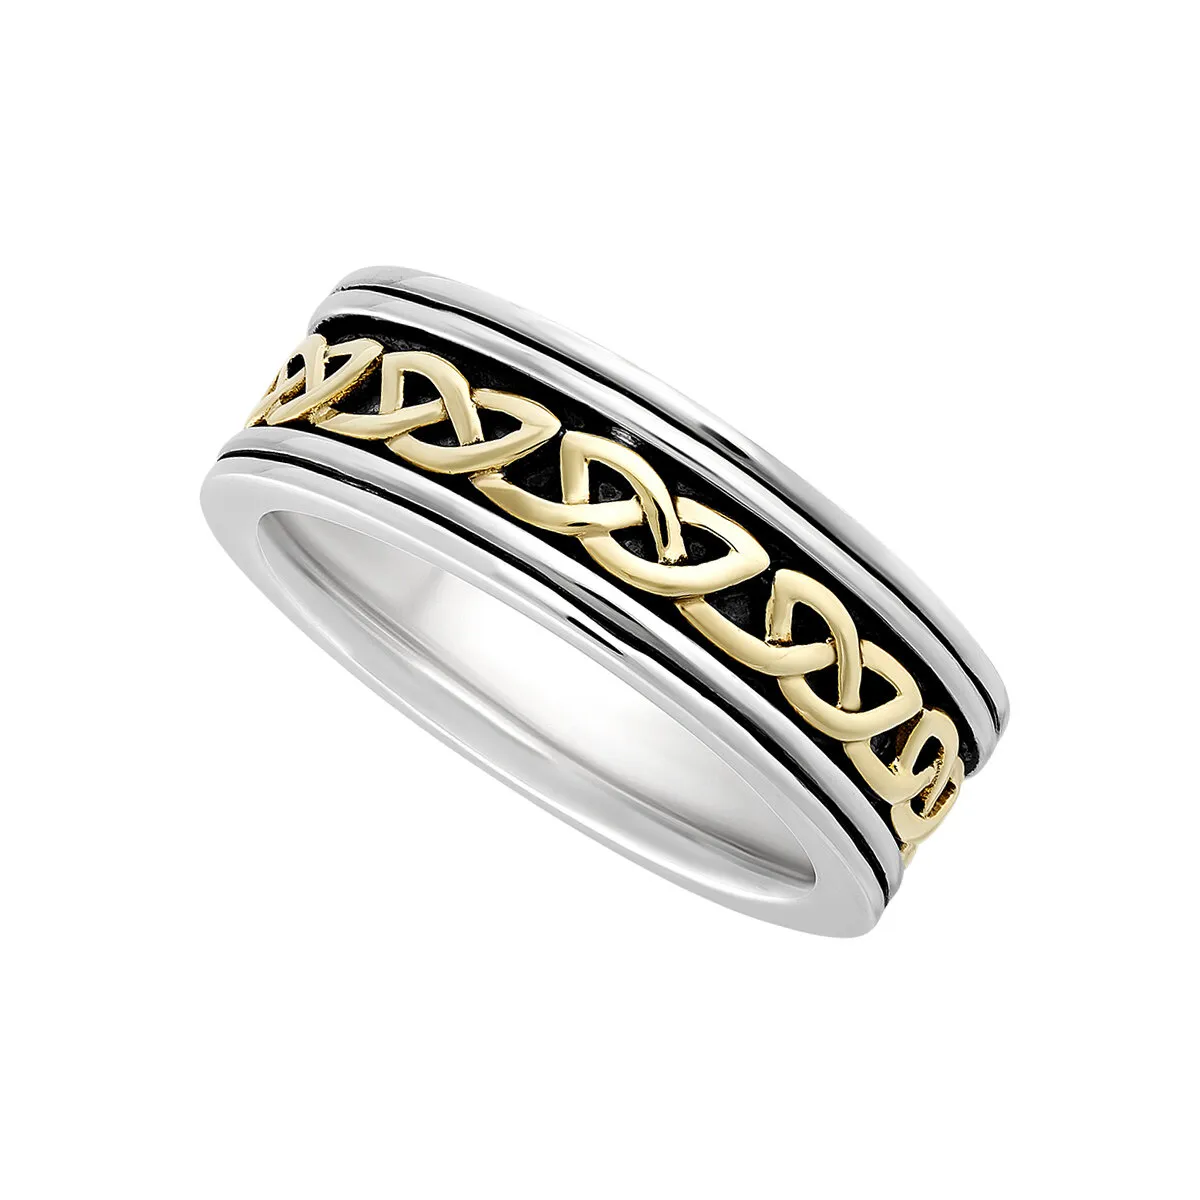 Mens 10k Gold & Silver Oxidized Celtic Knot Ring...